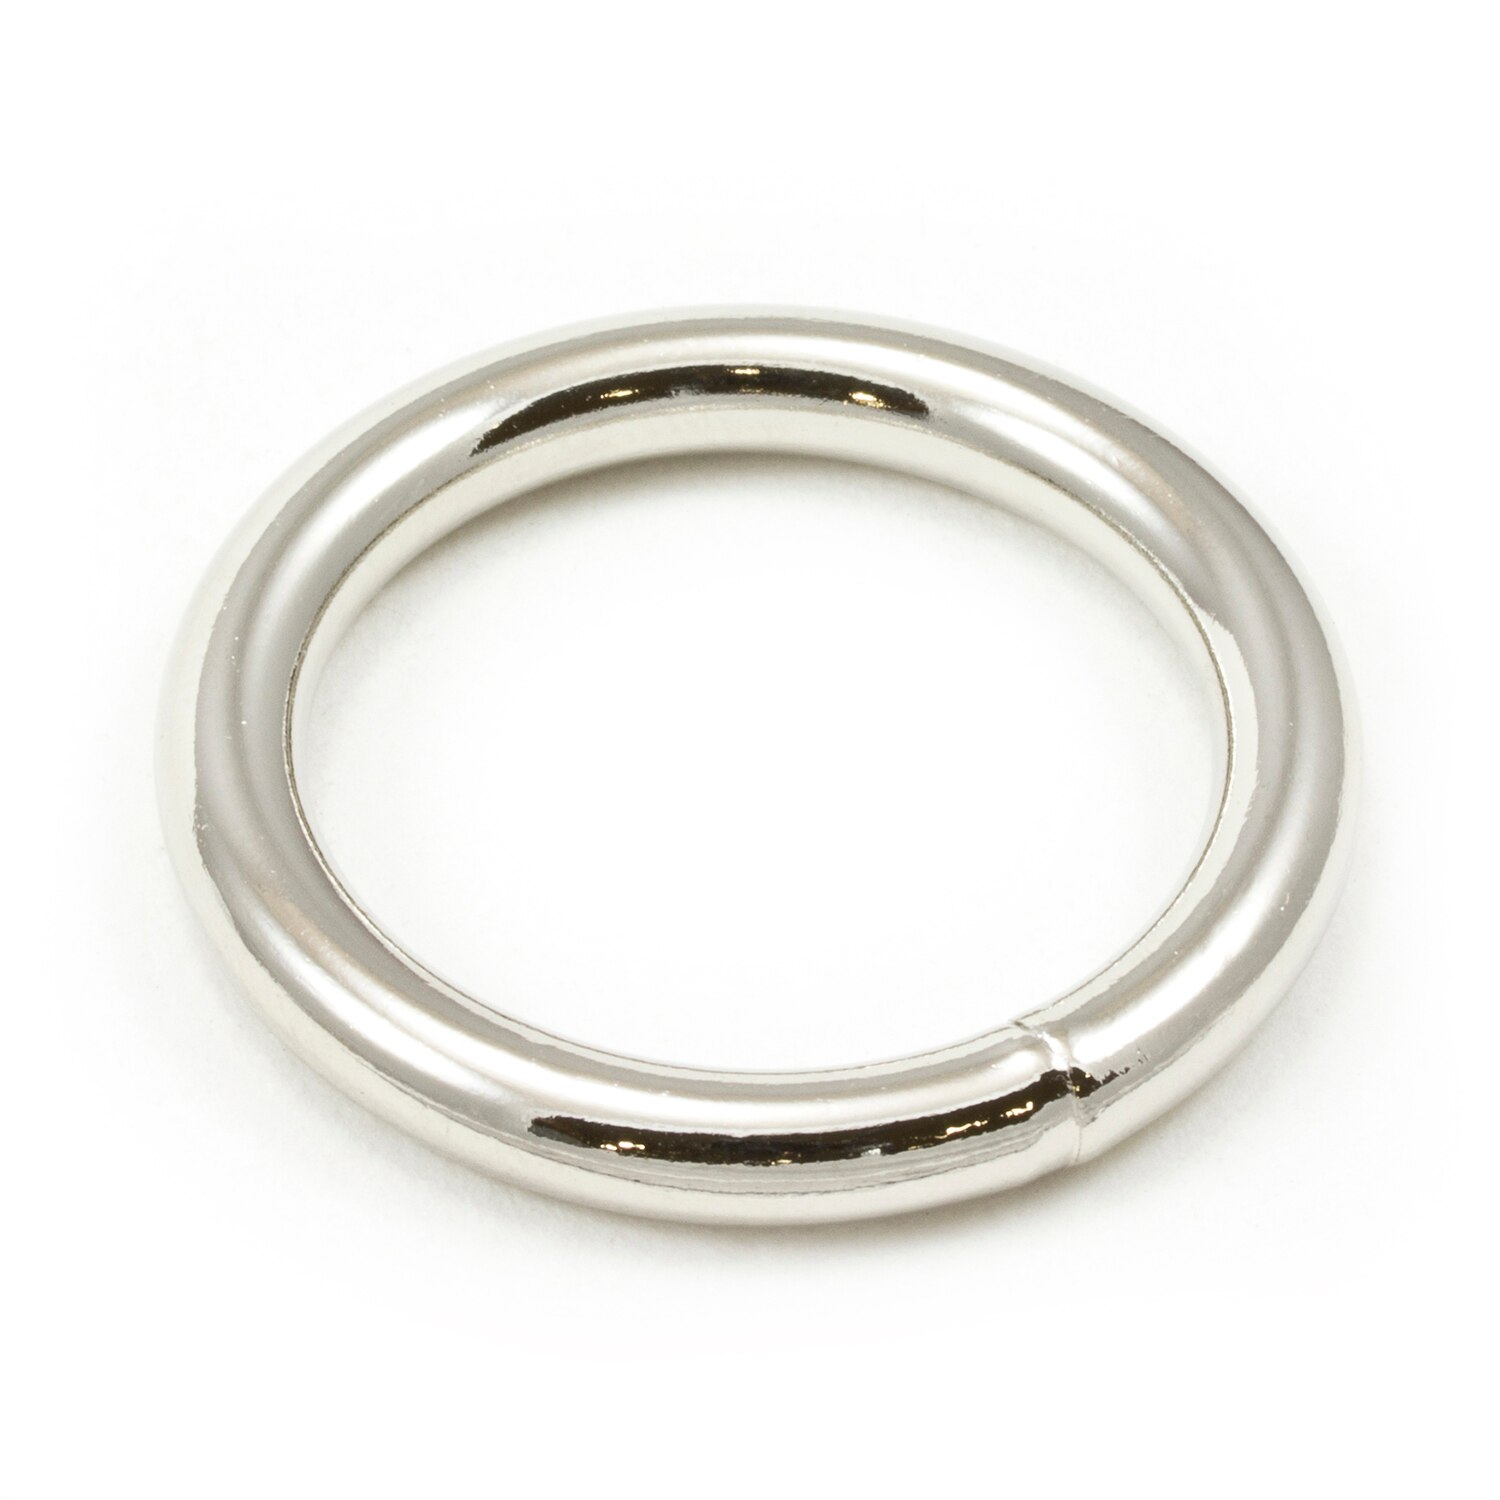 10pcs/pack O rings Metal Non Welded Nickel Plated Collars Round